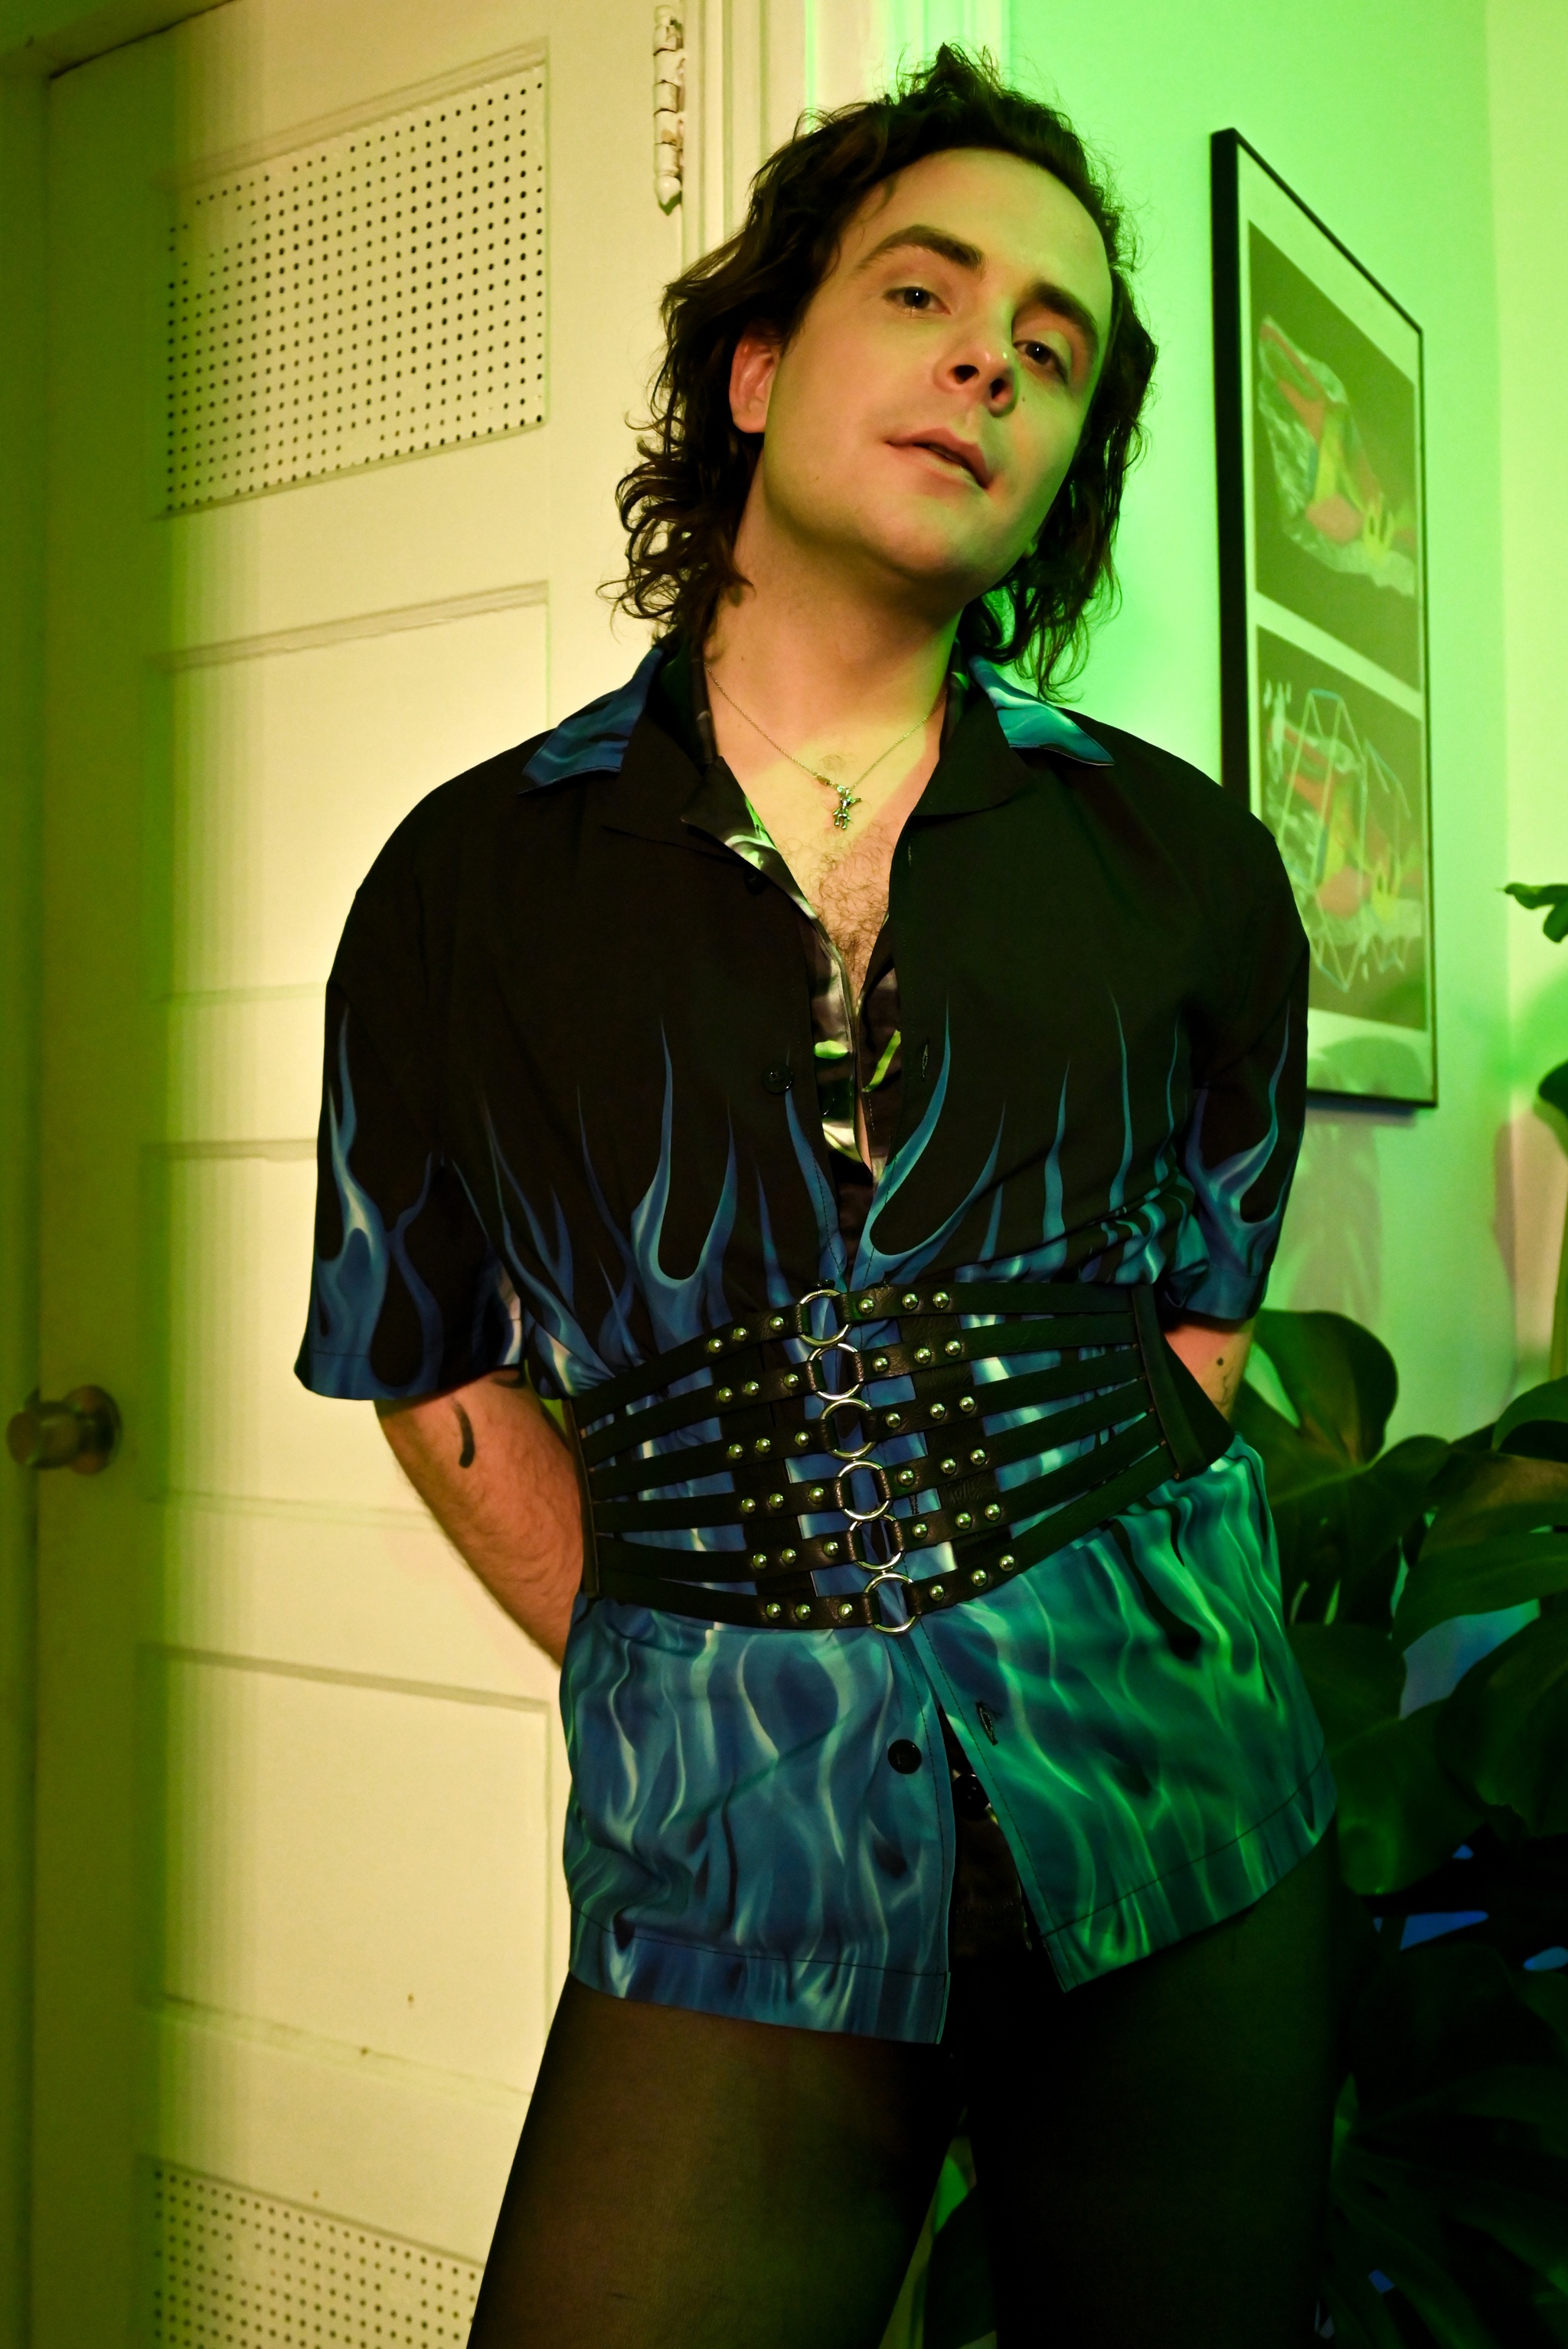 Electronic musician Despina stands in a doorway with green light in the room behind them. They hold their head slightly cocked backward and wear a short sleeve shirt with a print of blue flames rising from the bottom hem. Around their waste is a wide leather belt with metal rings down the center. 